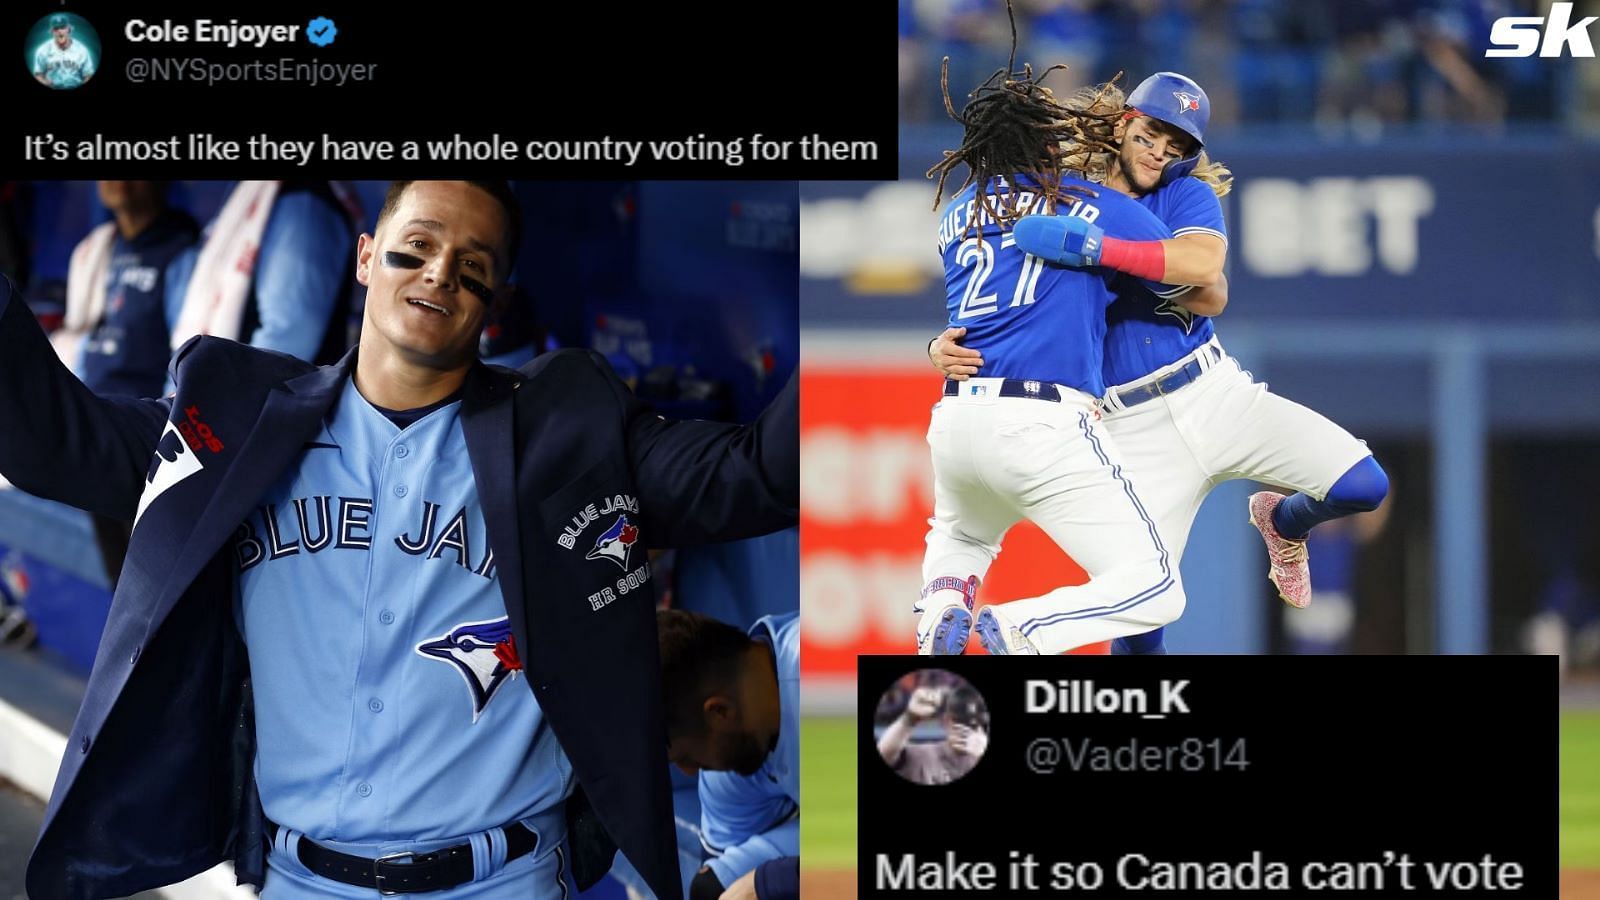 MLB fans rankled as Toronto Blue Jays again dominate early All-Star Game balloting